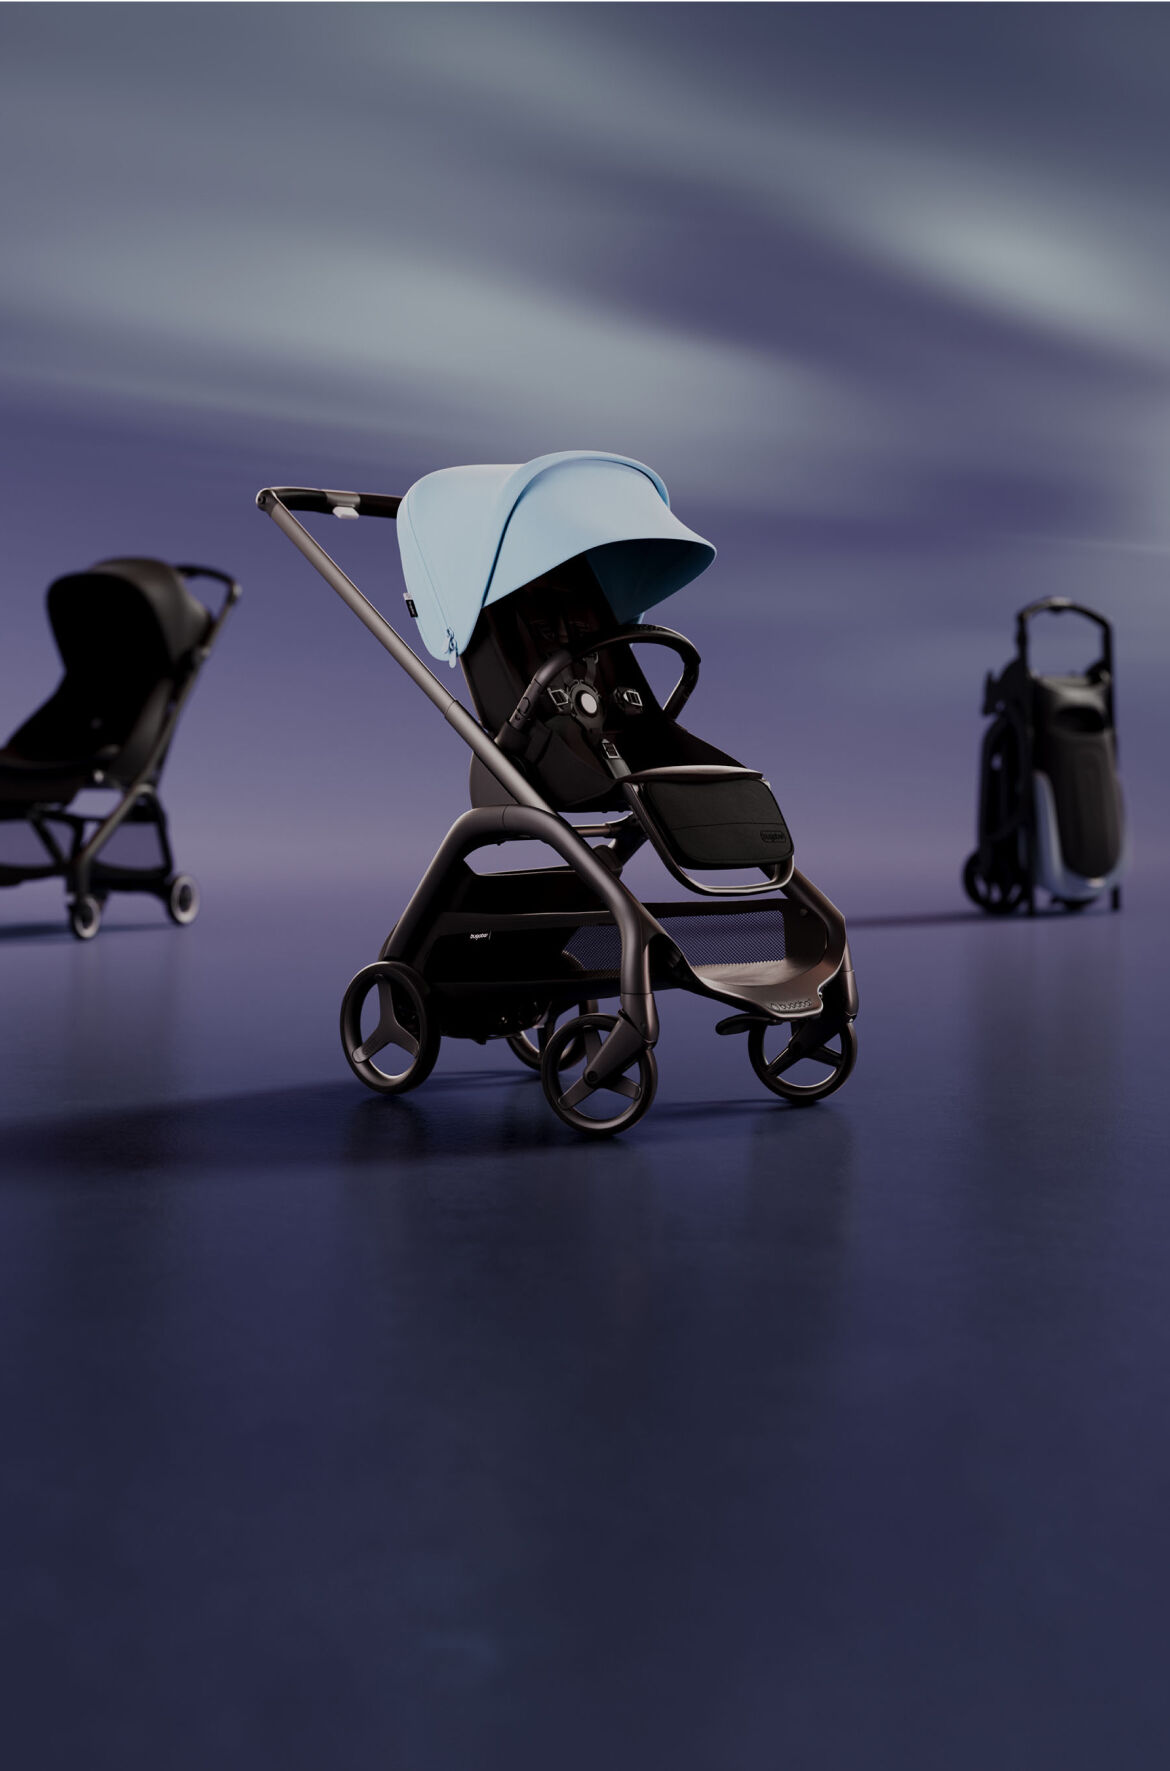 A lineup of 3 pushchairs. At the front is a Bugaboo Dragonfly with Skyline Blue sun canopy. On the left is a Bugaboo Butterfly with Midnight Black fabrics. On the right is a self-standing folded Bugaboo Dragonfly.